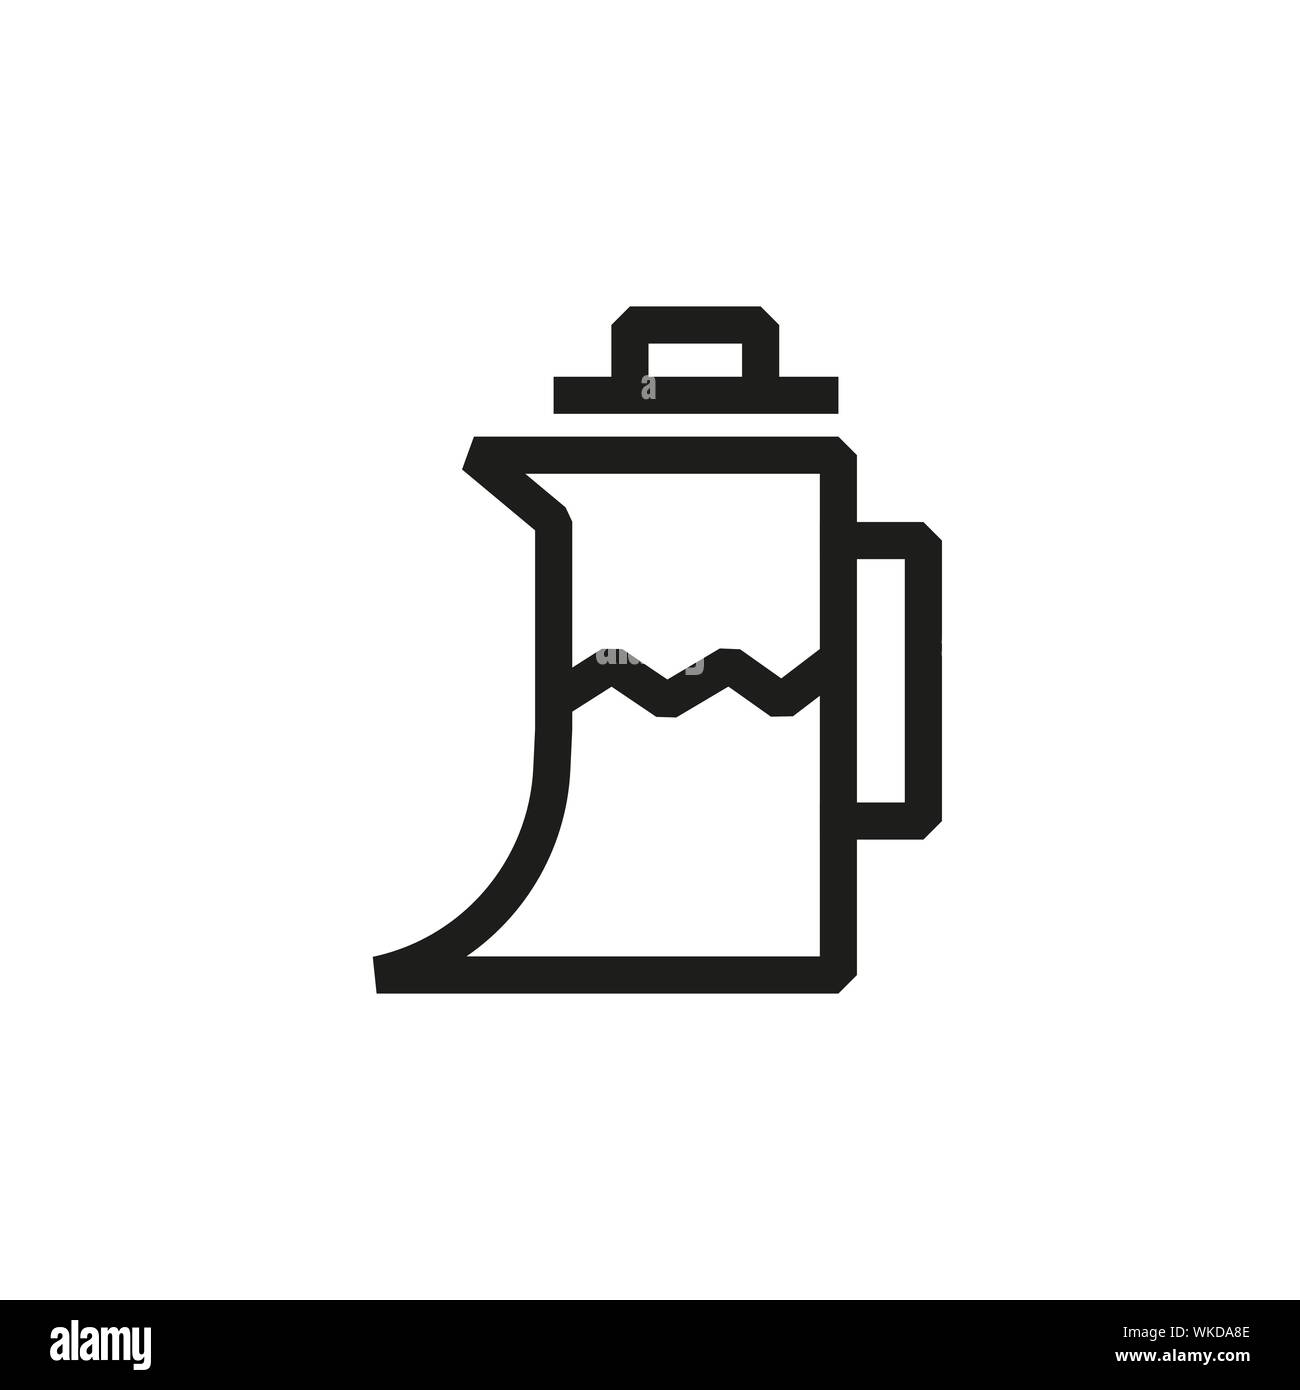 Kettle outline icon on white background Stock Vector